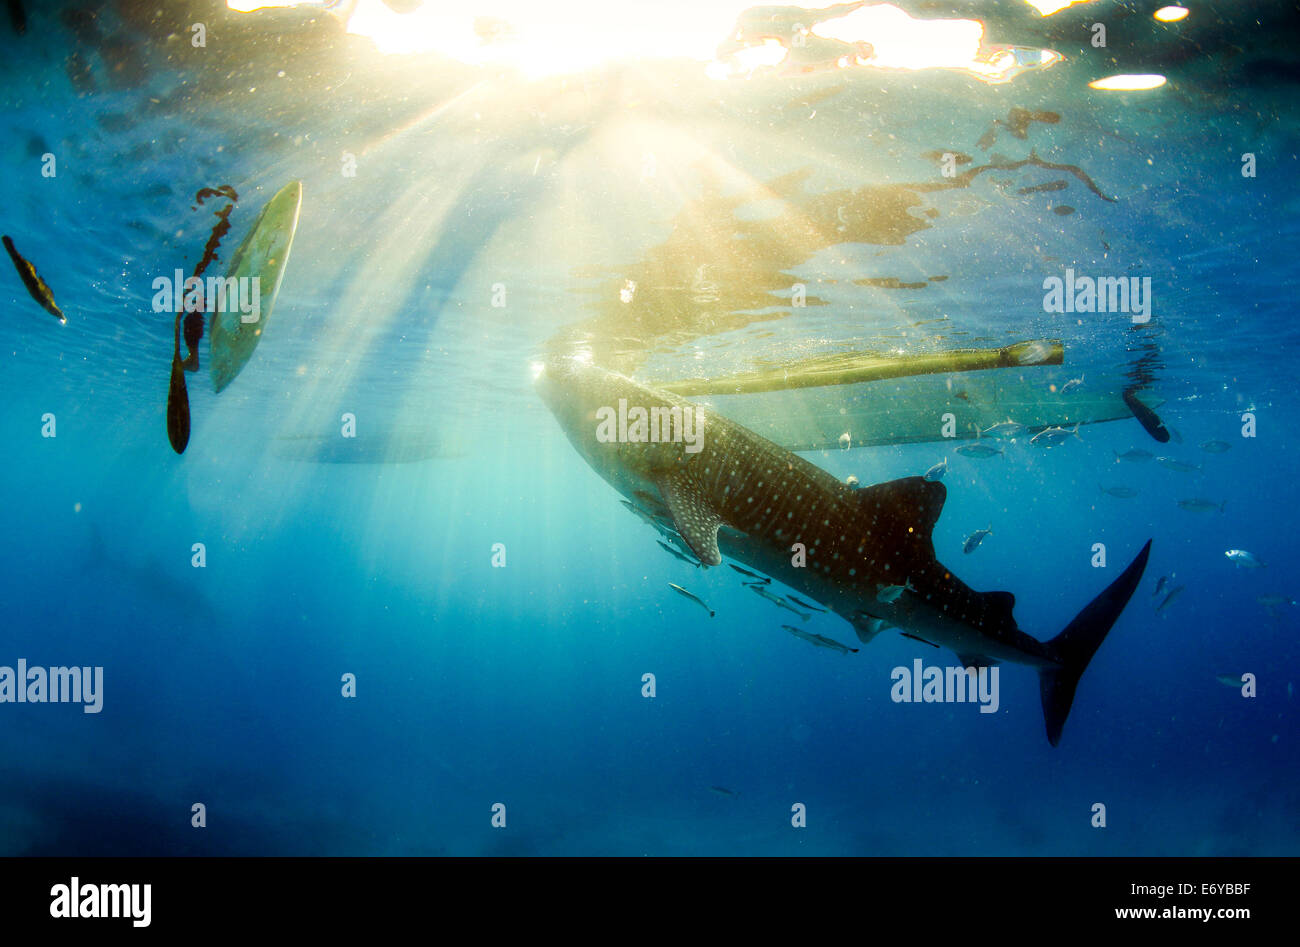 Whale shark underwater filter feeding on krill fed out by fishermen in Oslob, Philippines Stock Photo